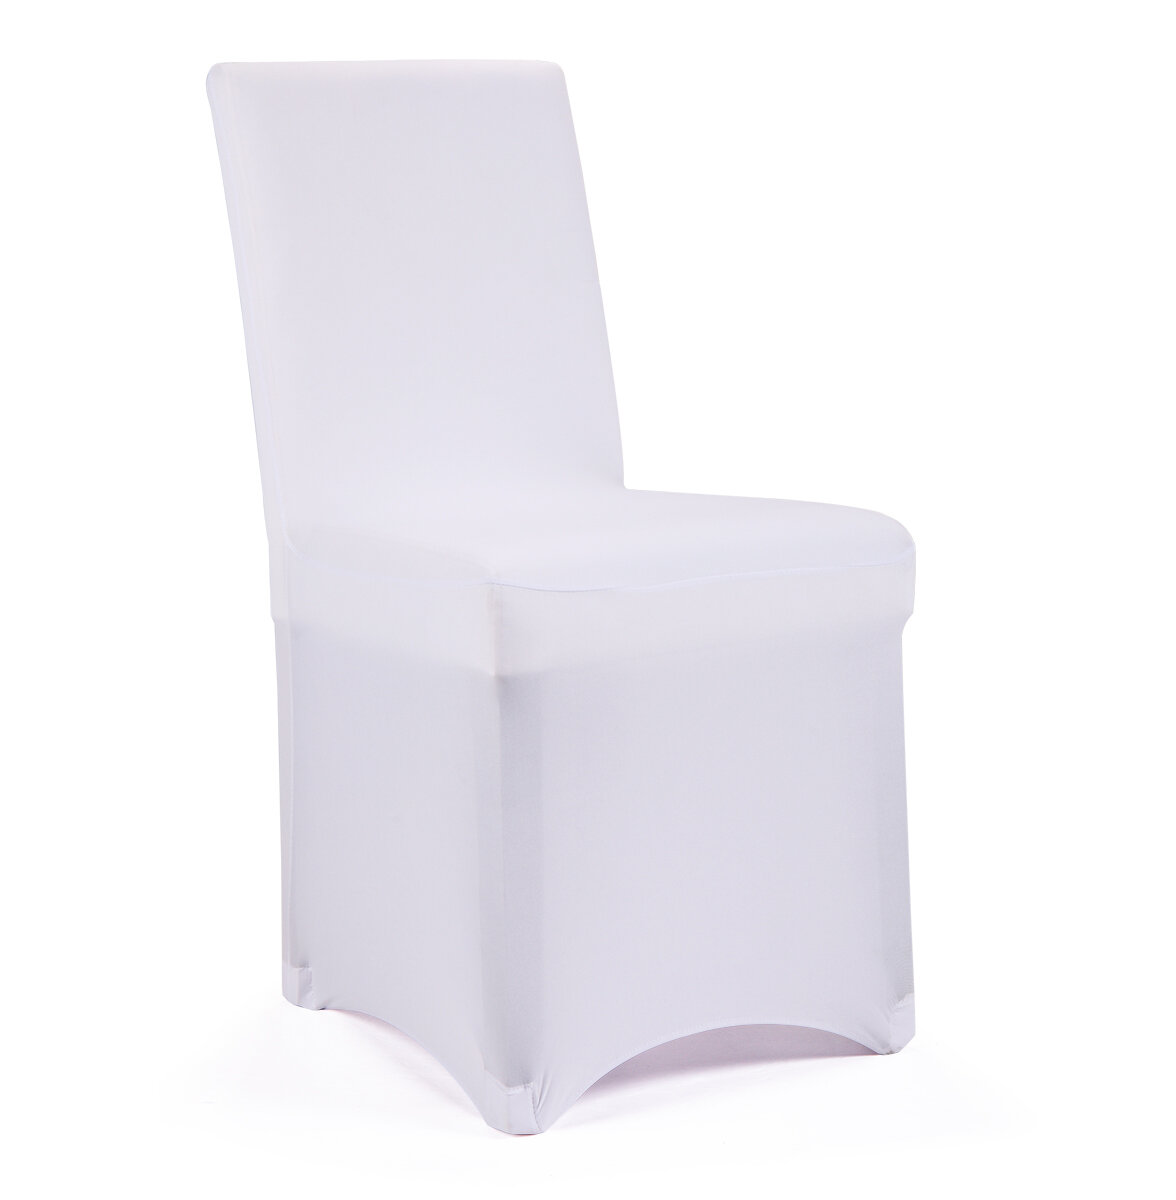 white chair covers to buy